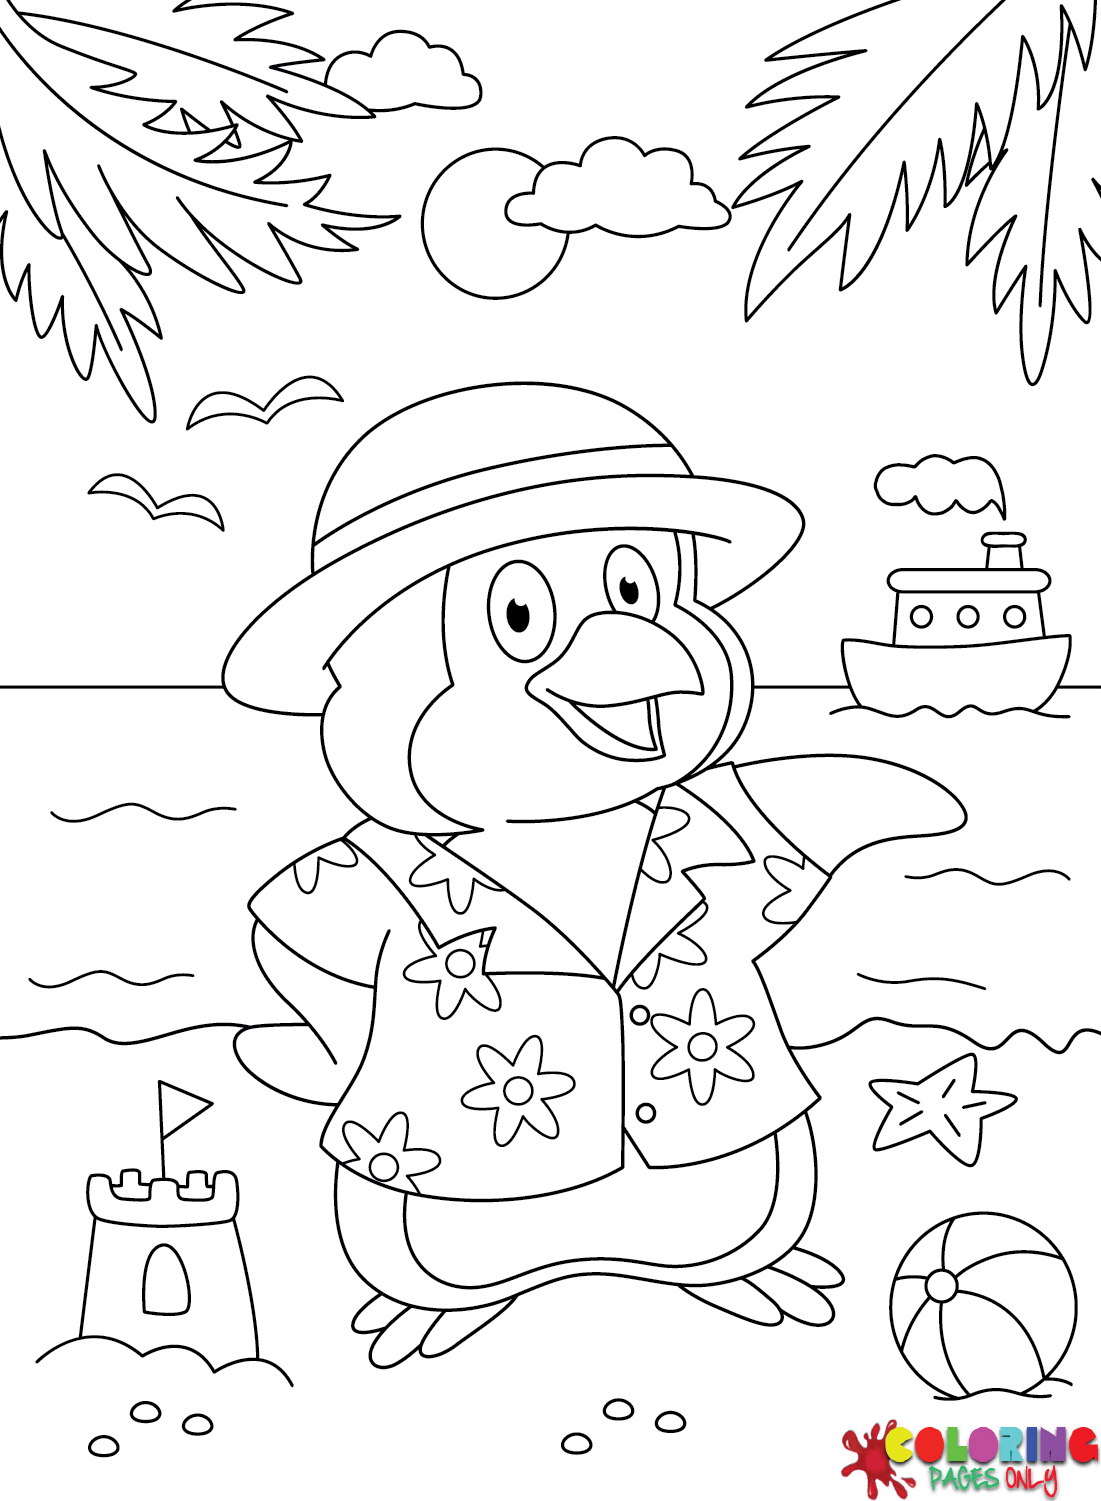 Kawaii Penguin 2 Coloring Pages